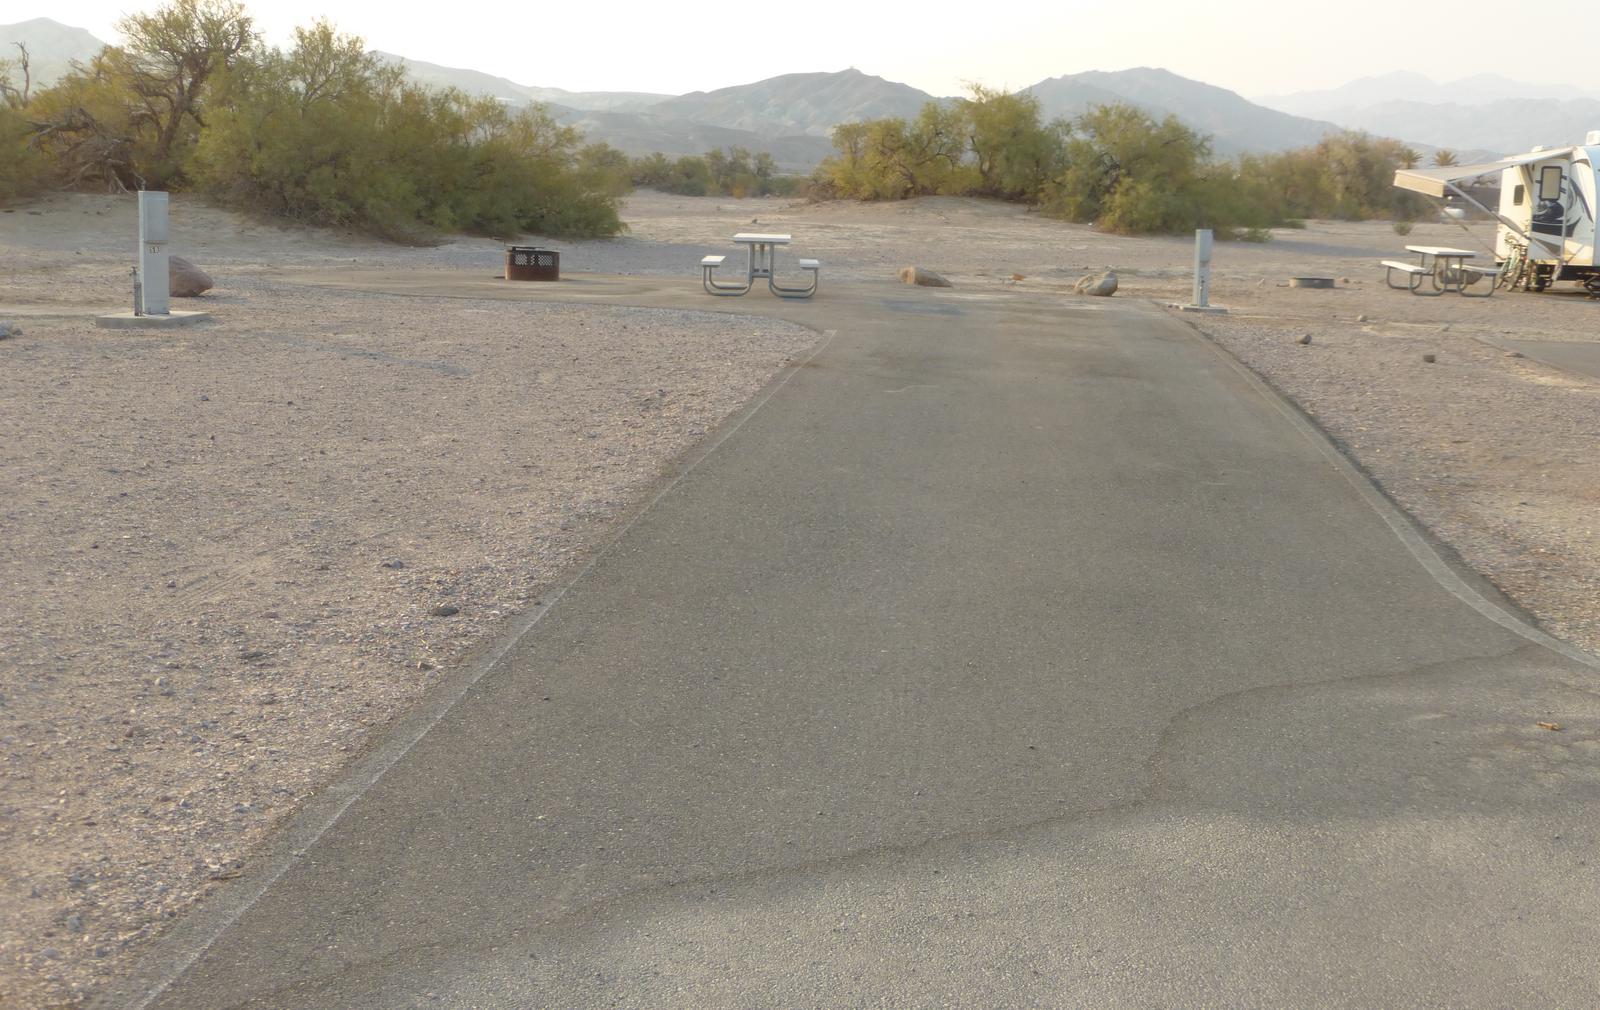 Furnace Creek Campground ADA accessable full hookup site #49. Water, sewer, and 30/50 amp electric connection. One ADA accessible fire pit and picnic table.